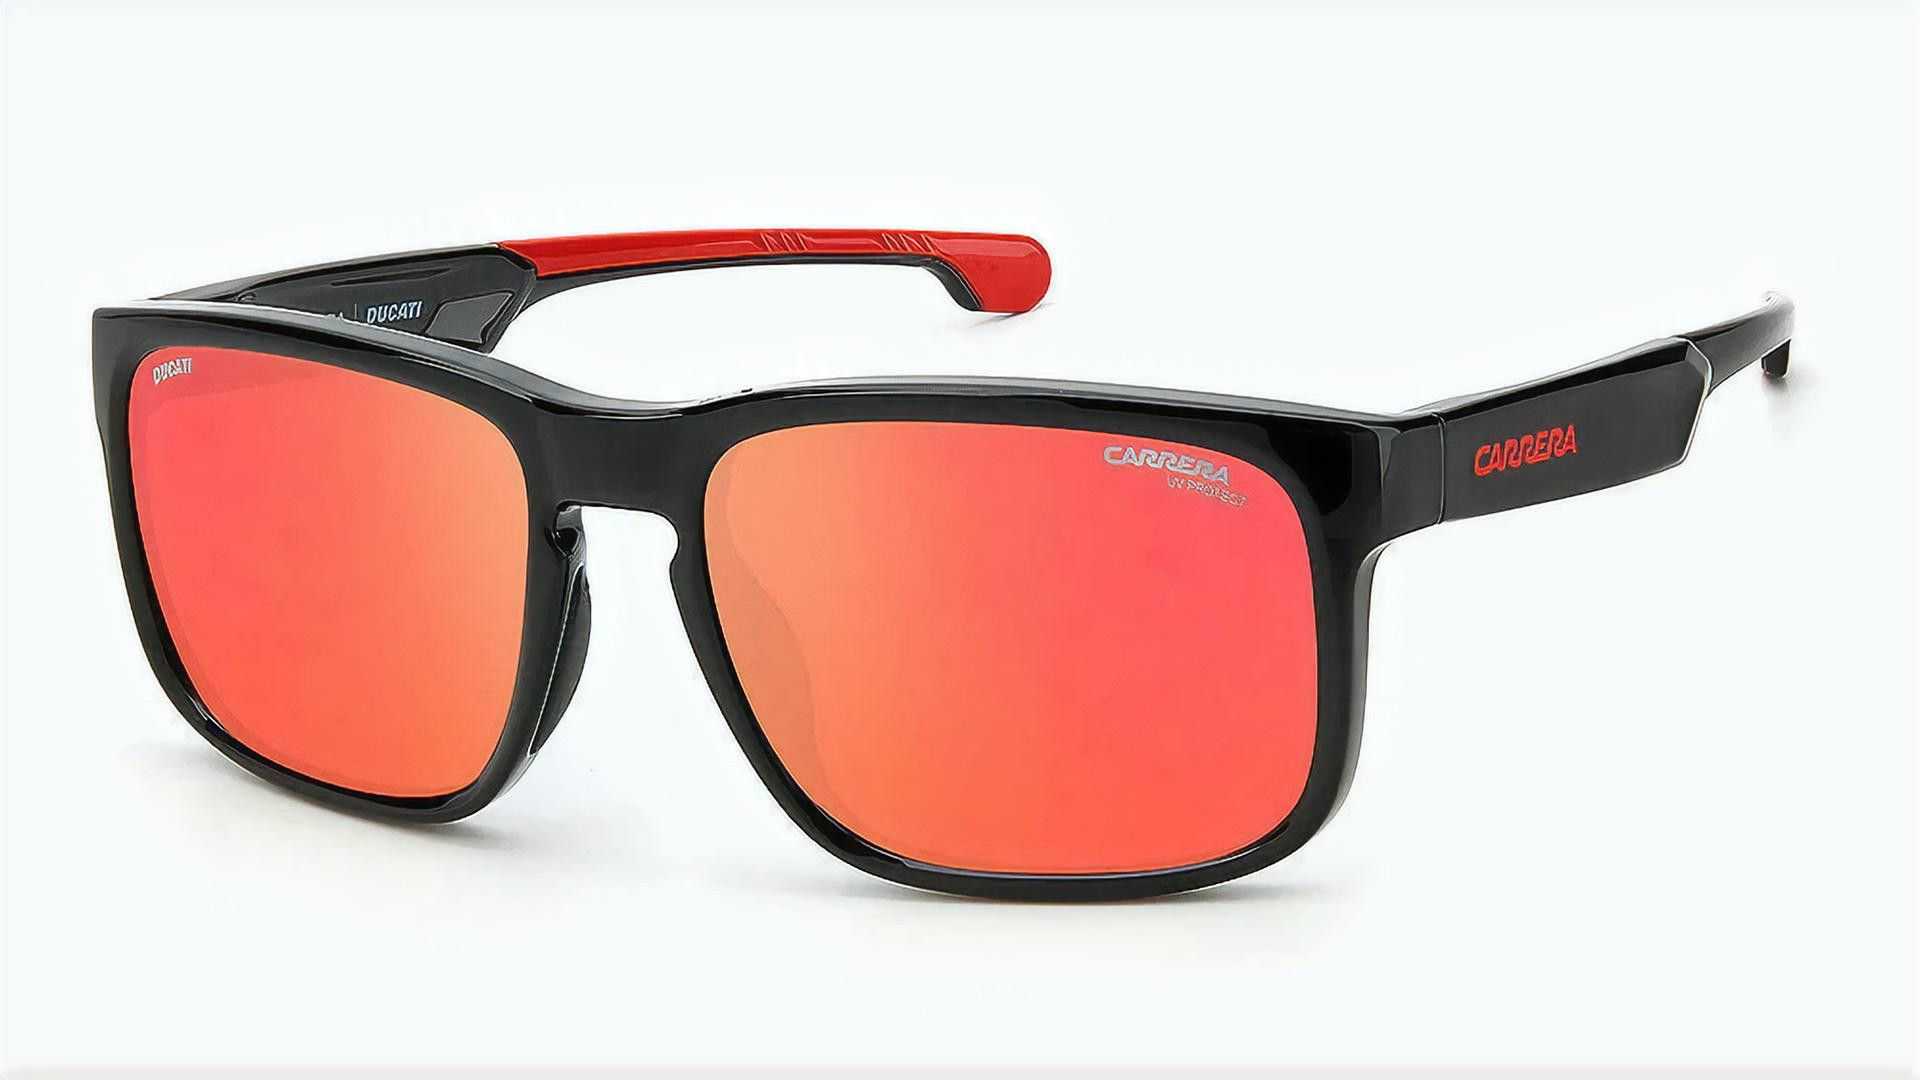 Ducati teams up with Carrera to create stylish eyewear line - Motorcycle  news, Motorcycle reviews from Malaysia, Asia and the world -  